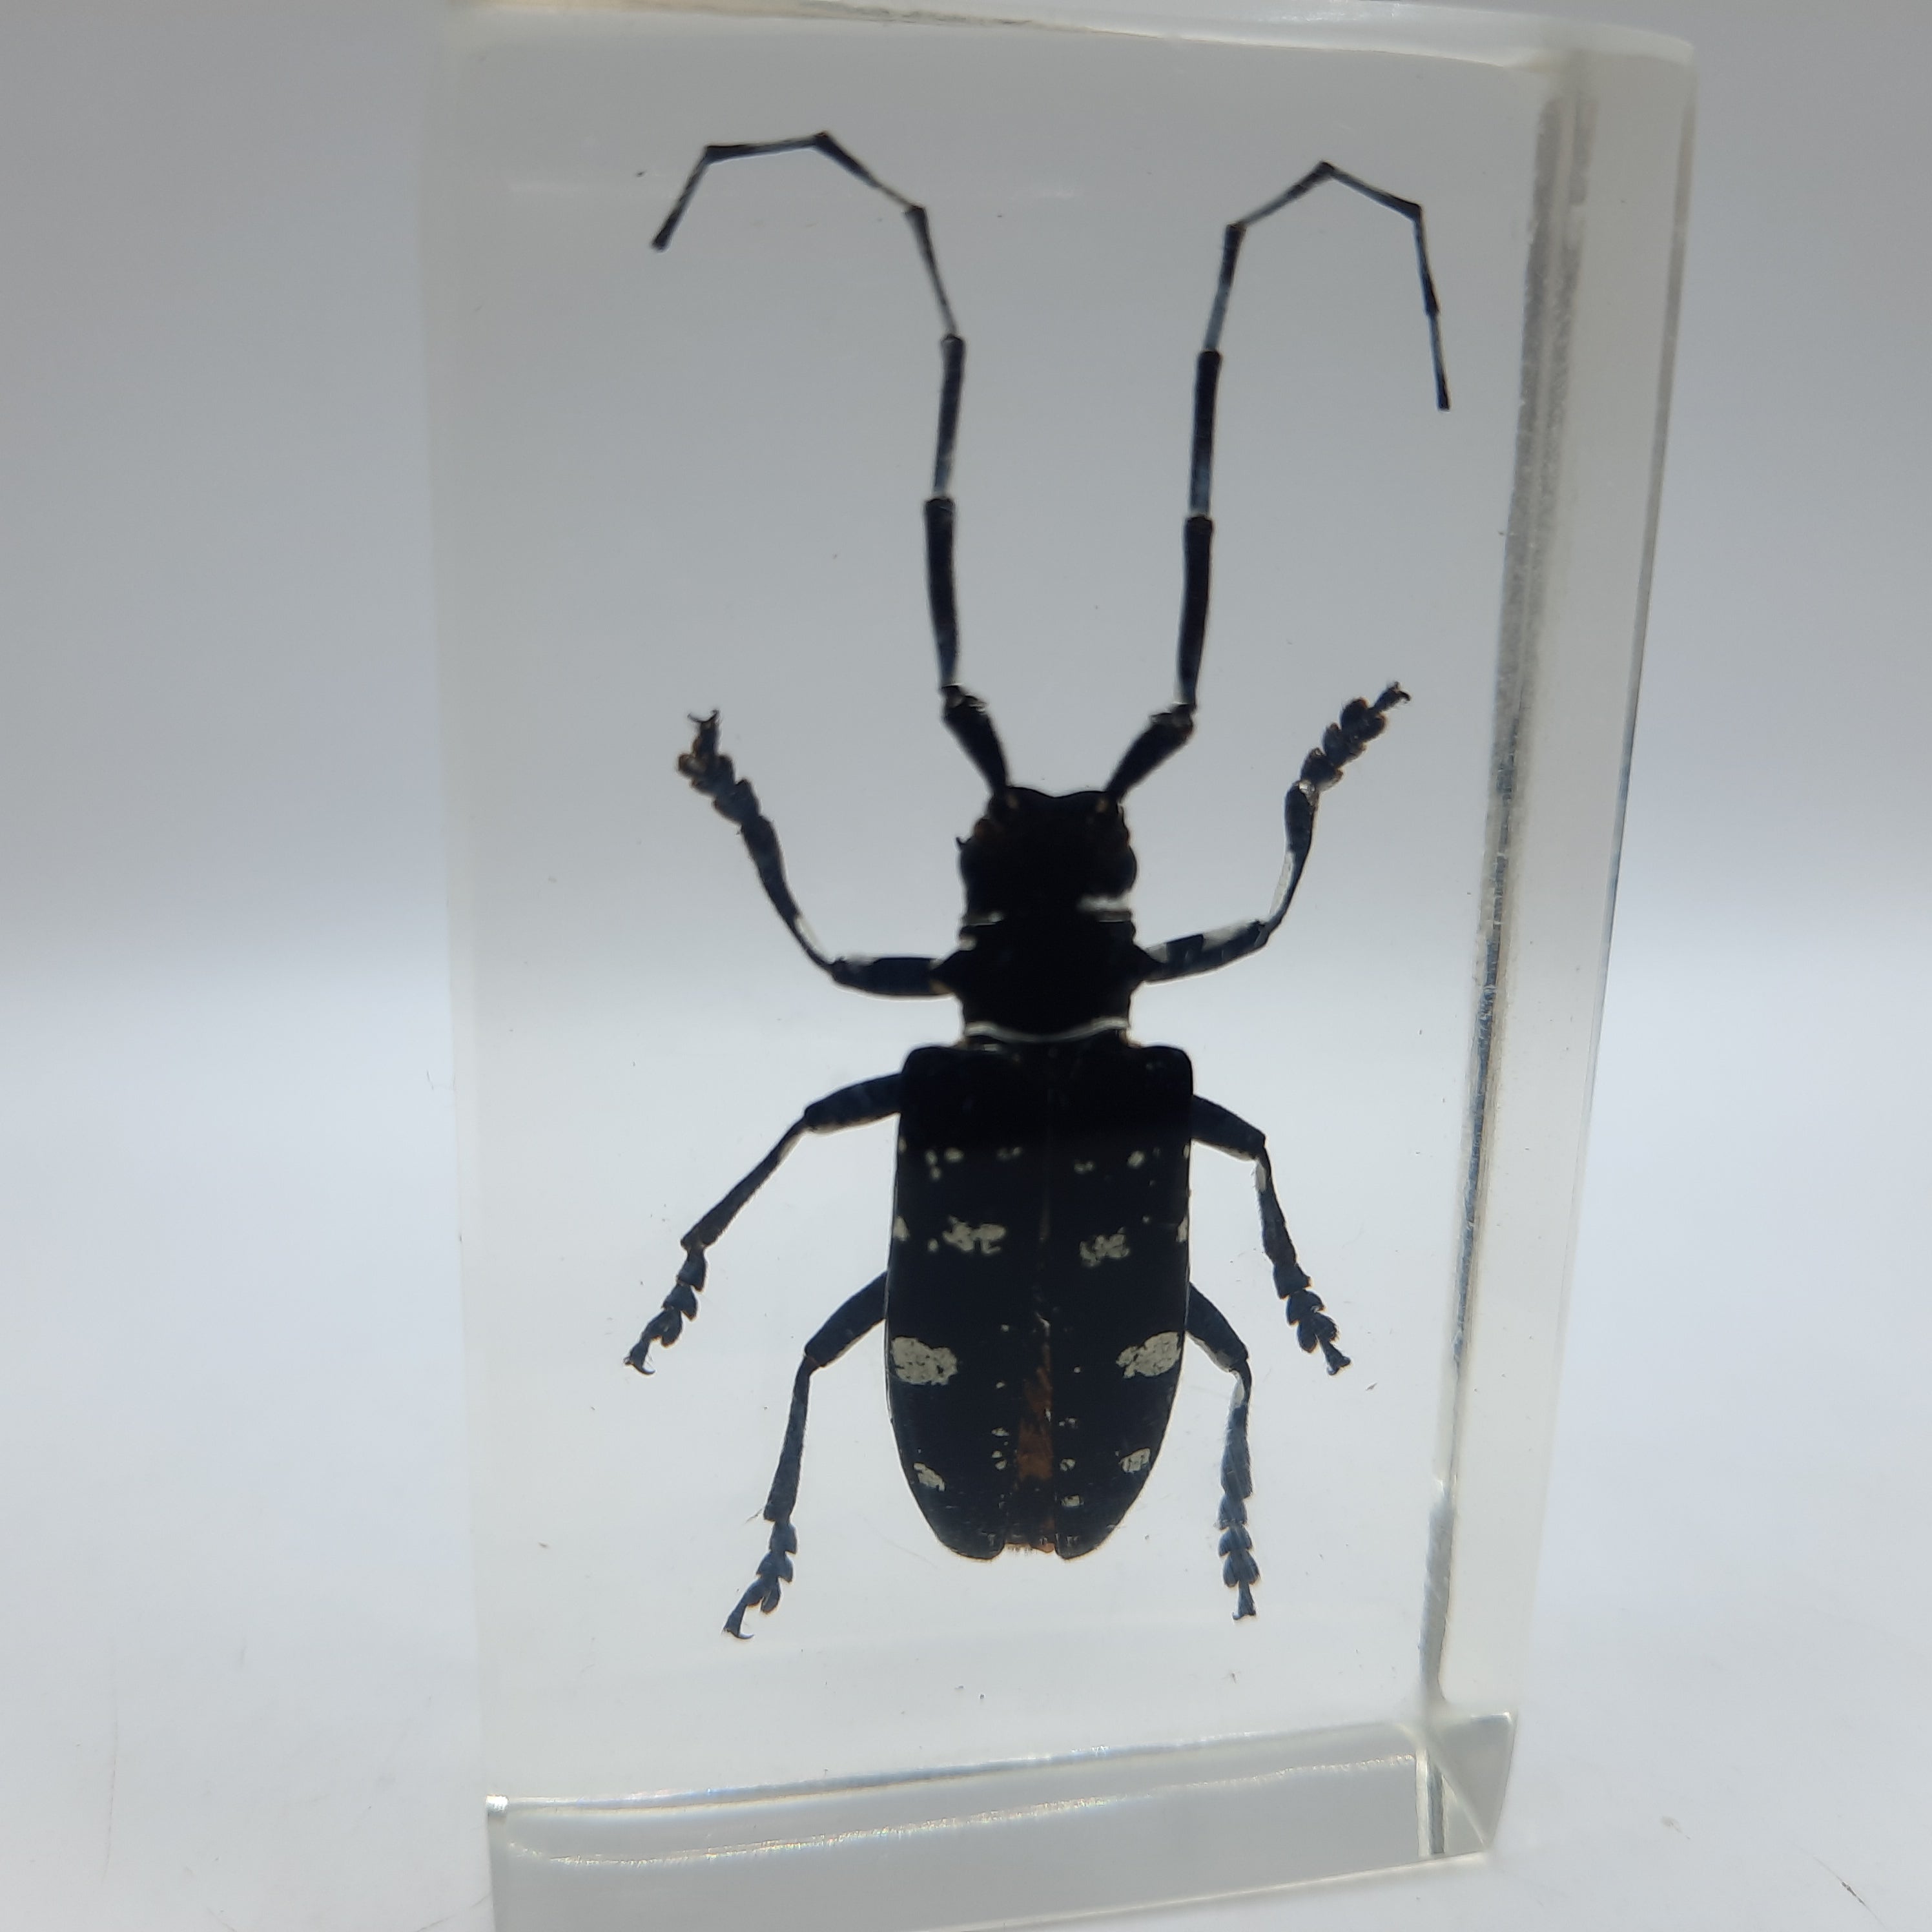 Insect Specimens RELOADED